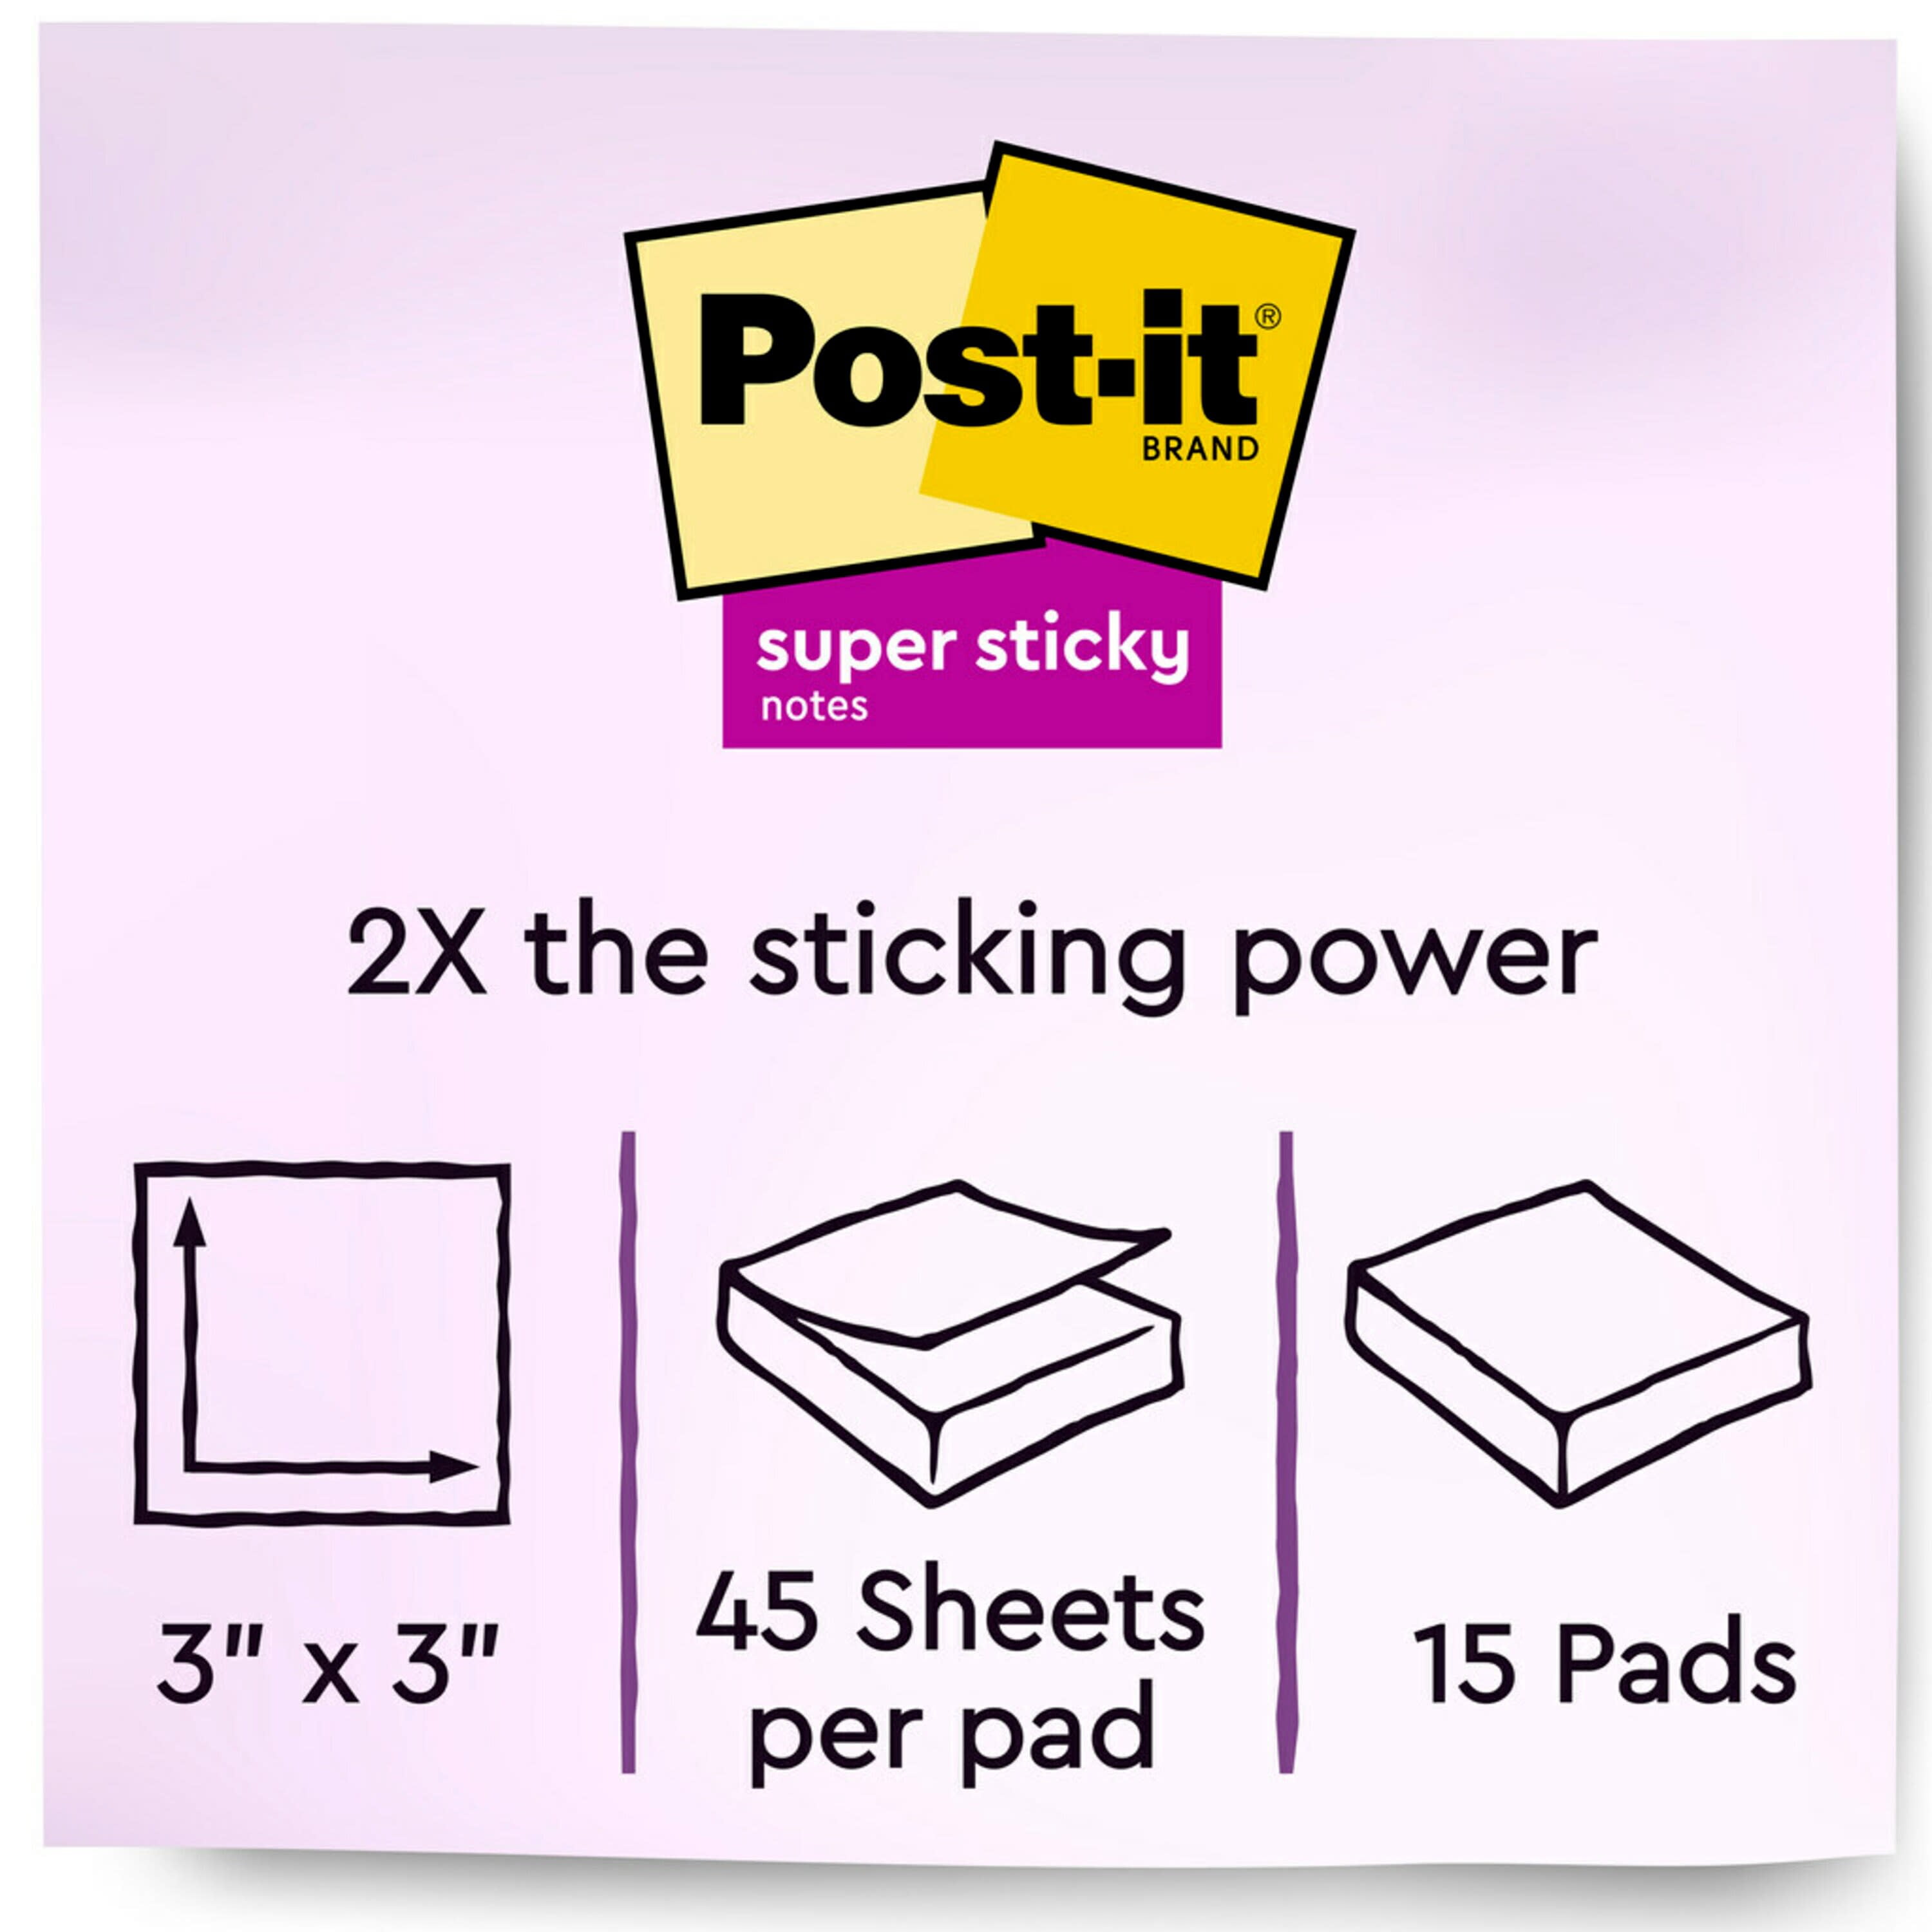 20 Pack) 4 Pack Sticky Notes 3x3 Inches,16 Pack Sticky Notes 0.75